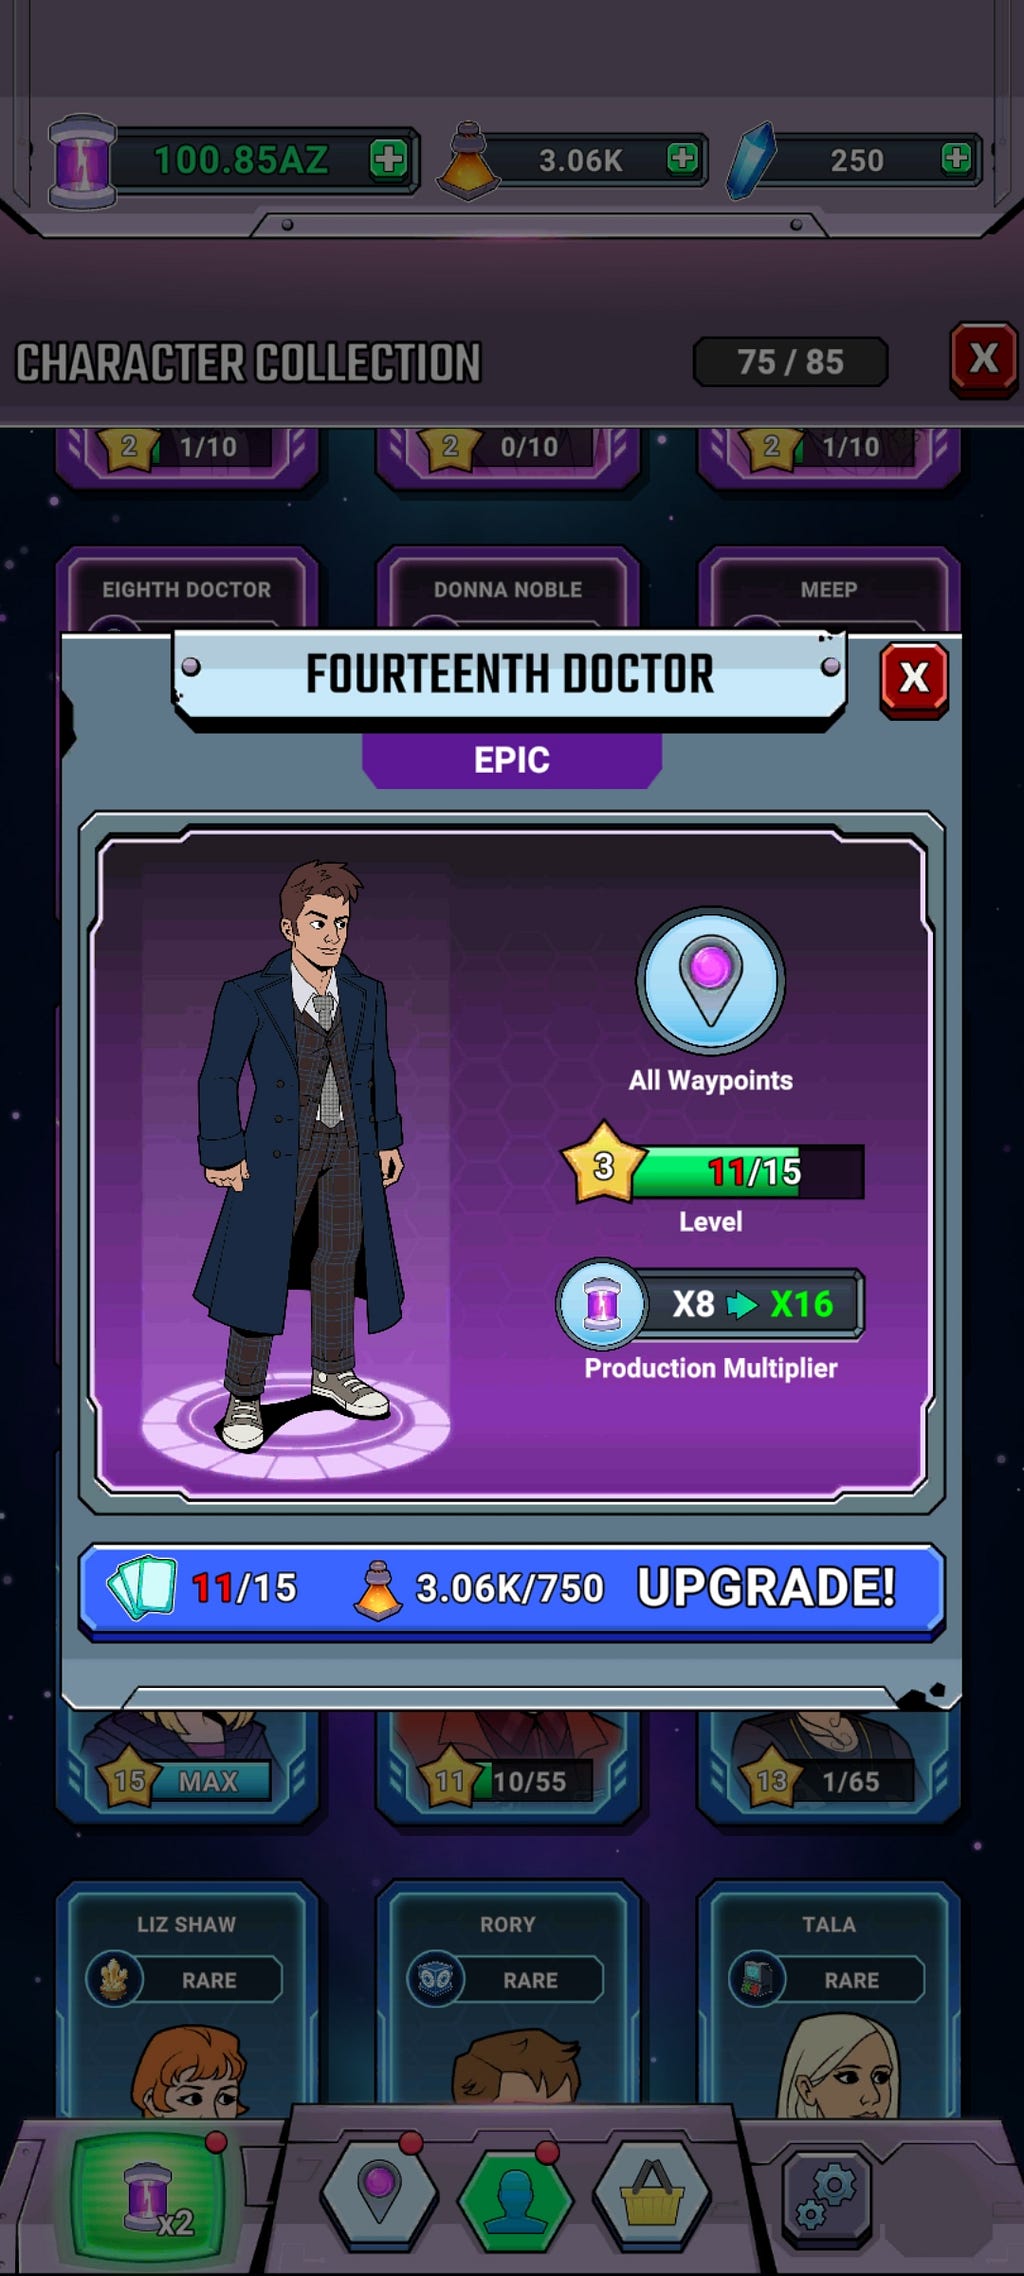 My Epic 14th Doctor cards.